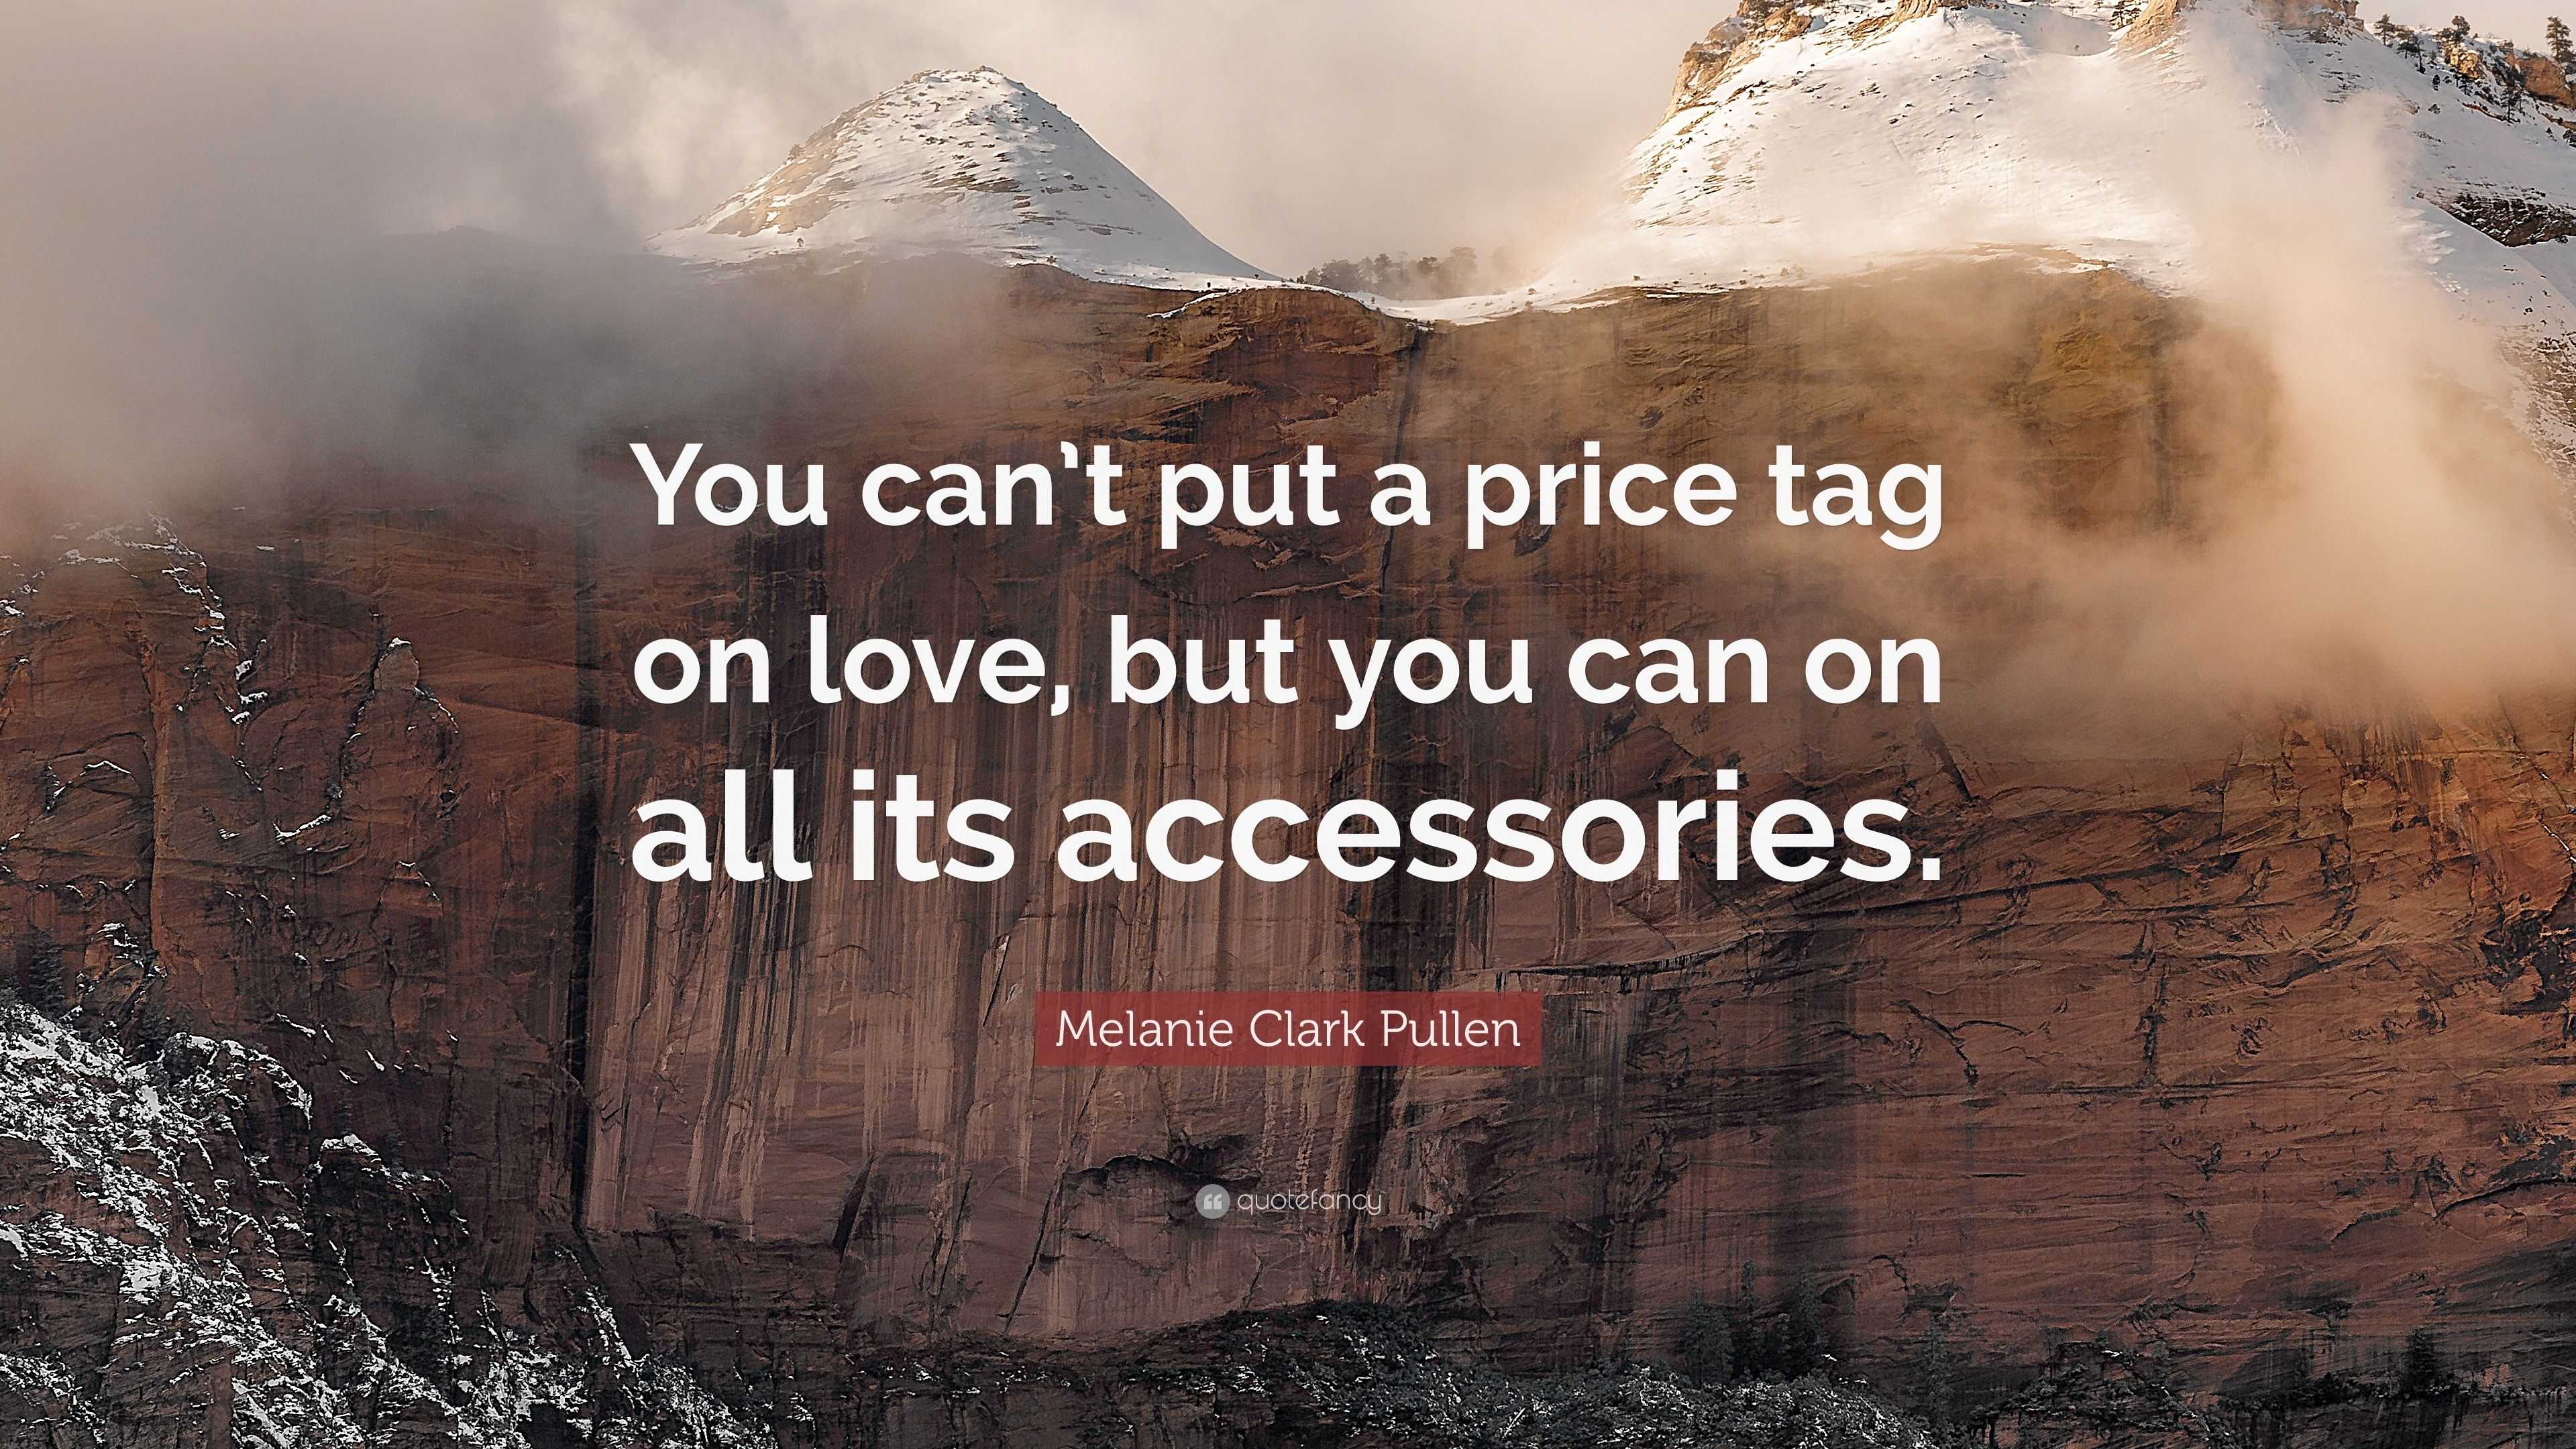 Melanie Clark Pullen Quote “You can t put a price tag on love